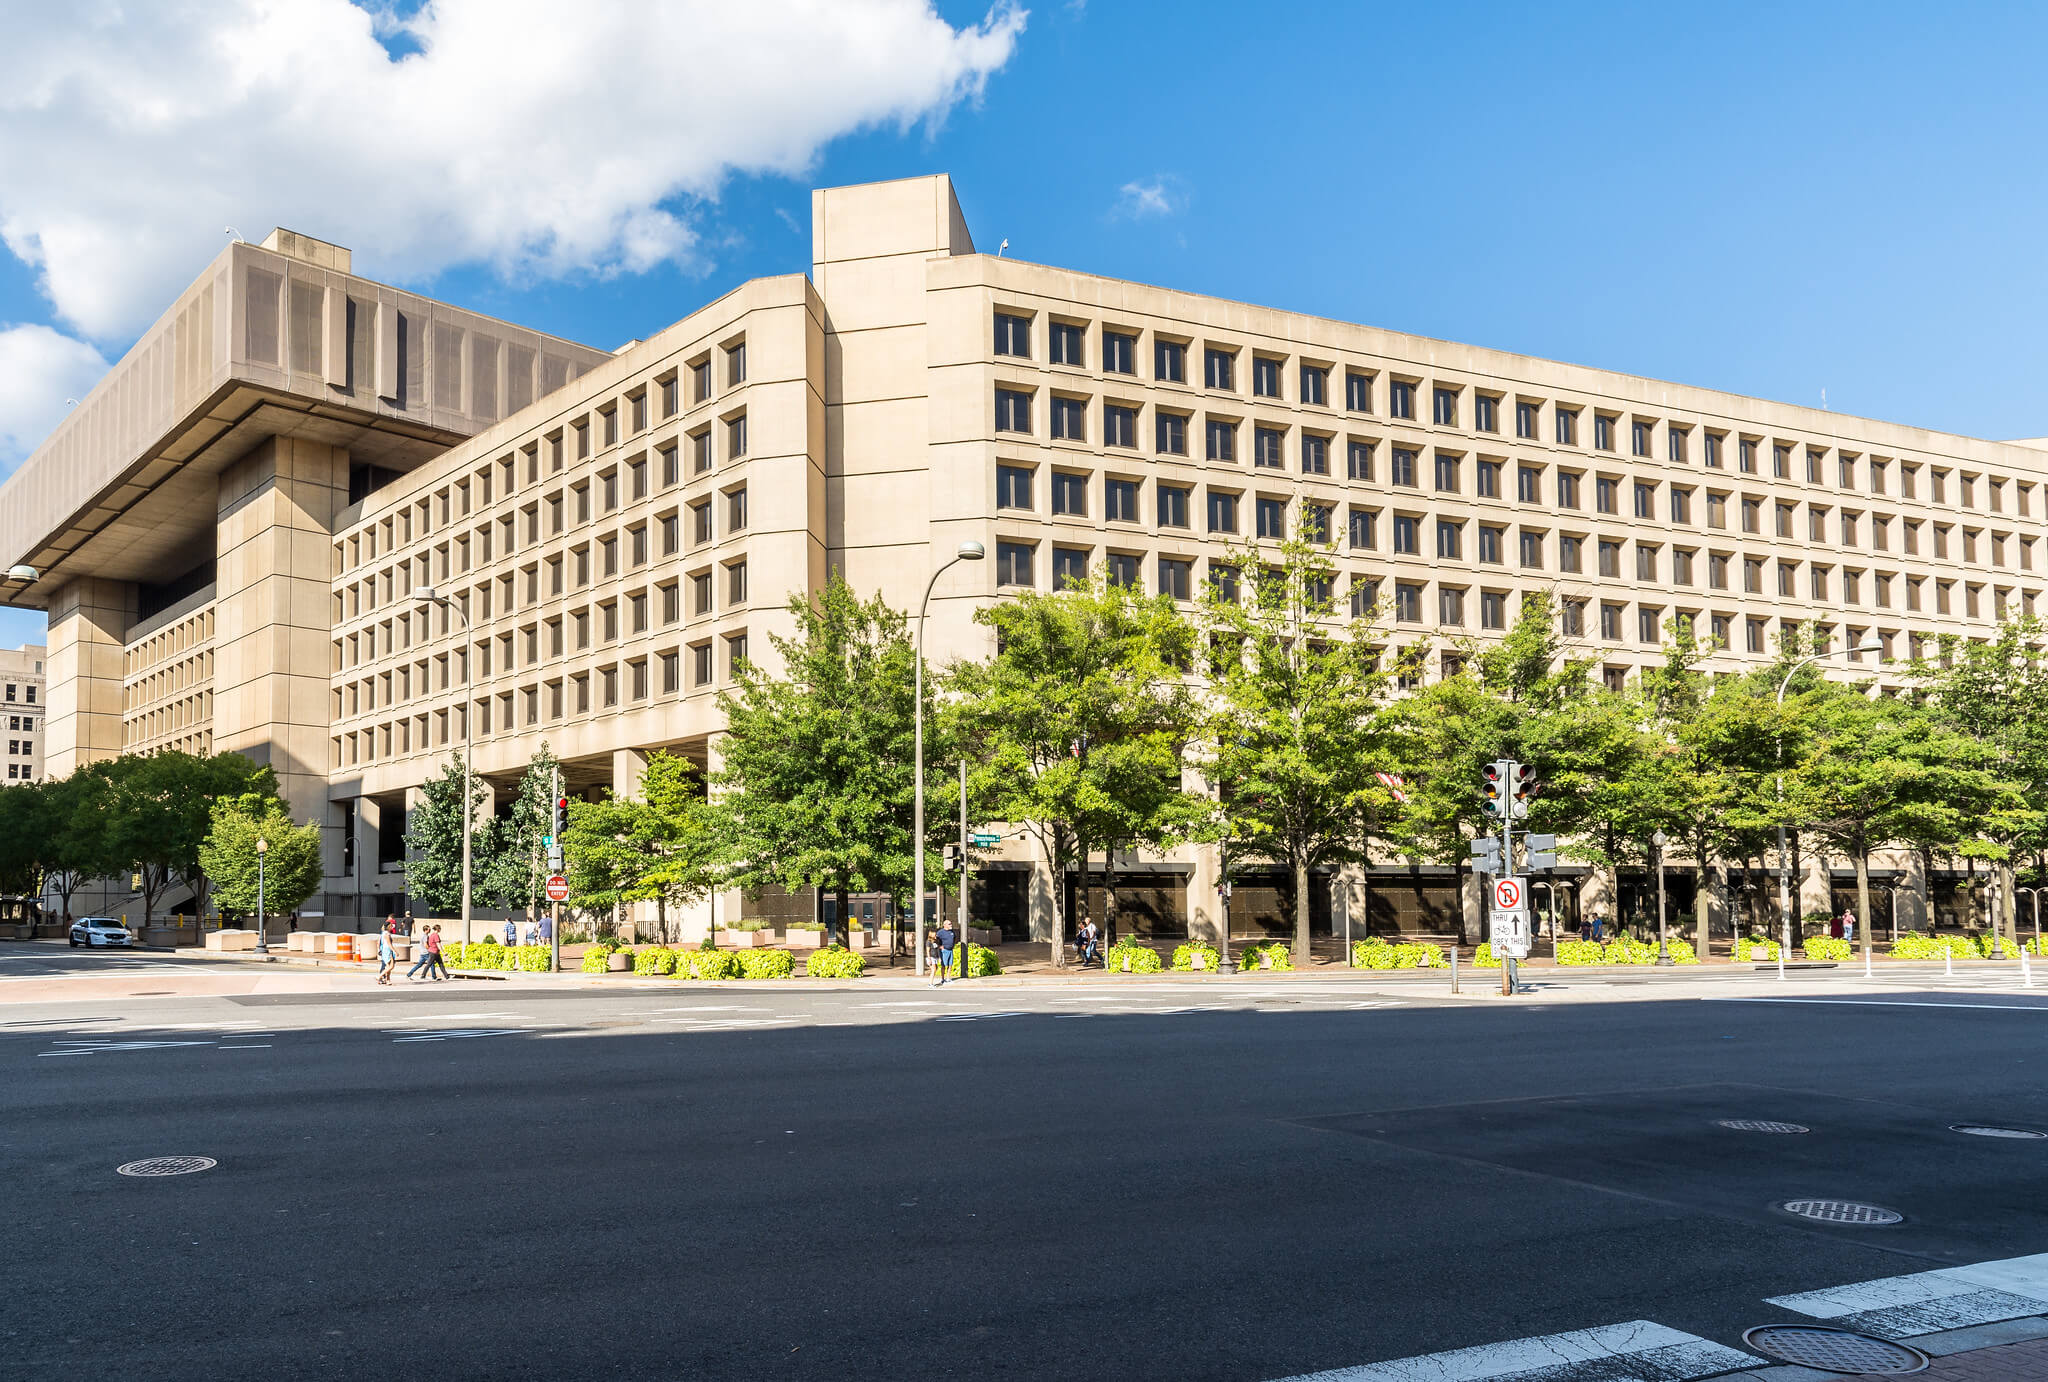 A view of the Federal Bureau of Investigation, which works to curb cyber cyberthreats.